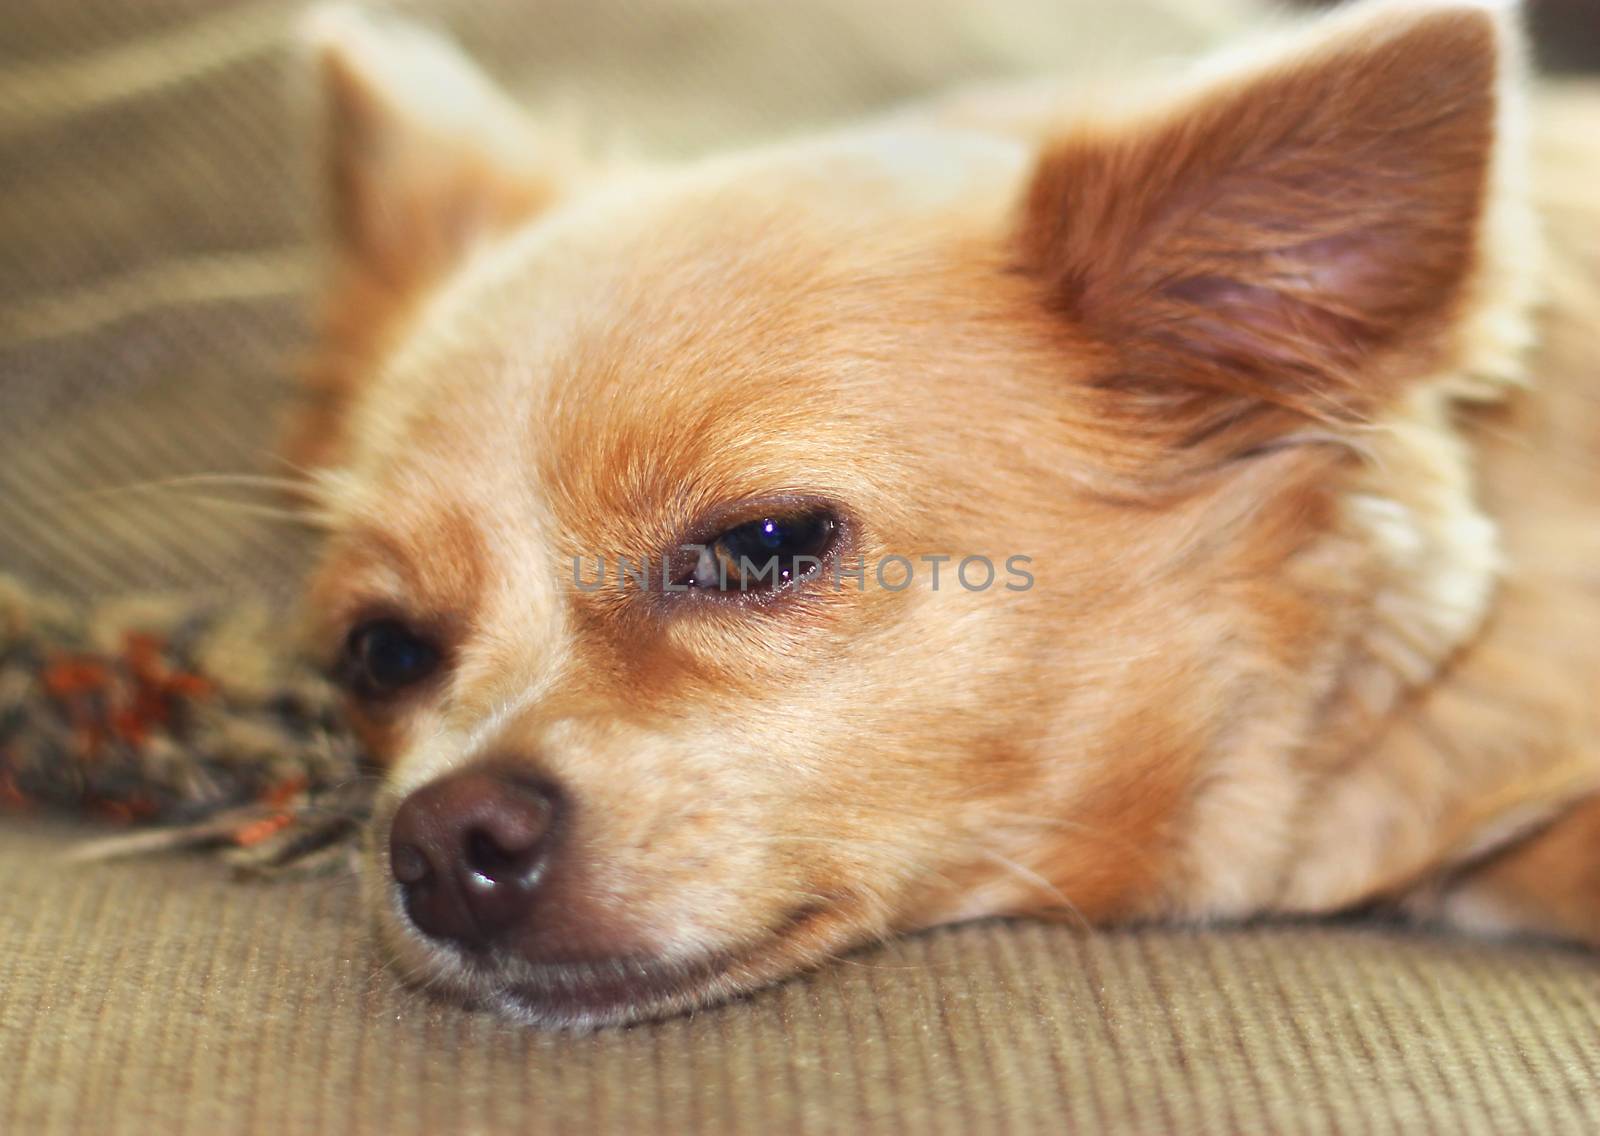 Napping Chihuahua by ziss